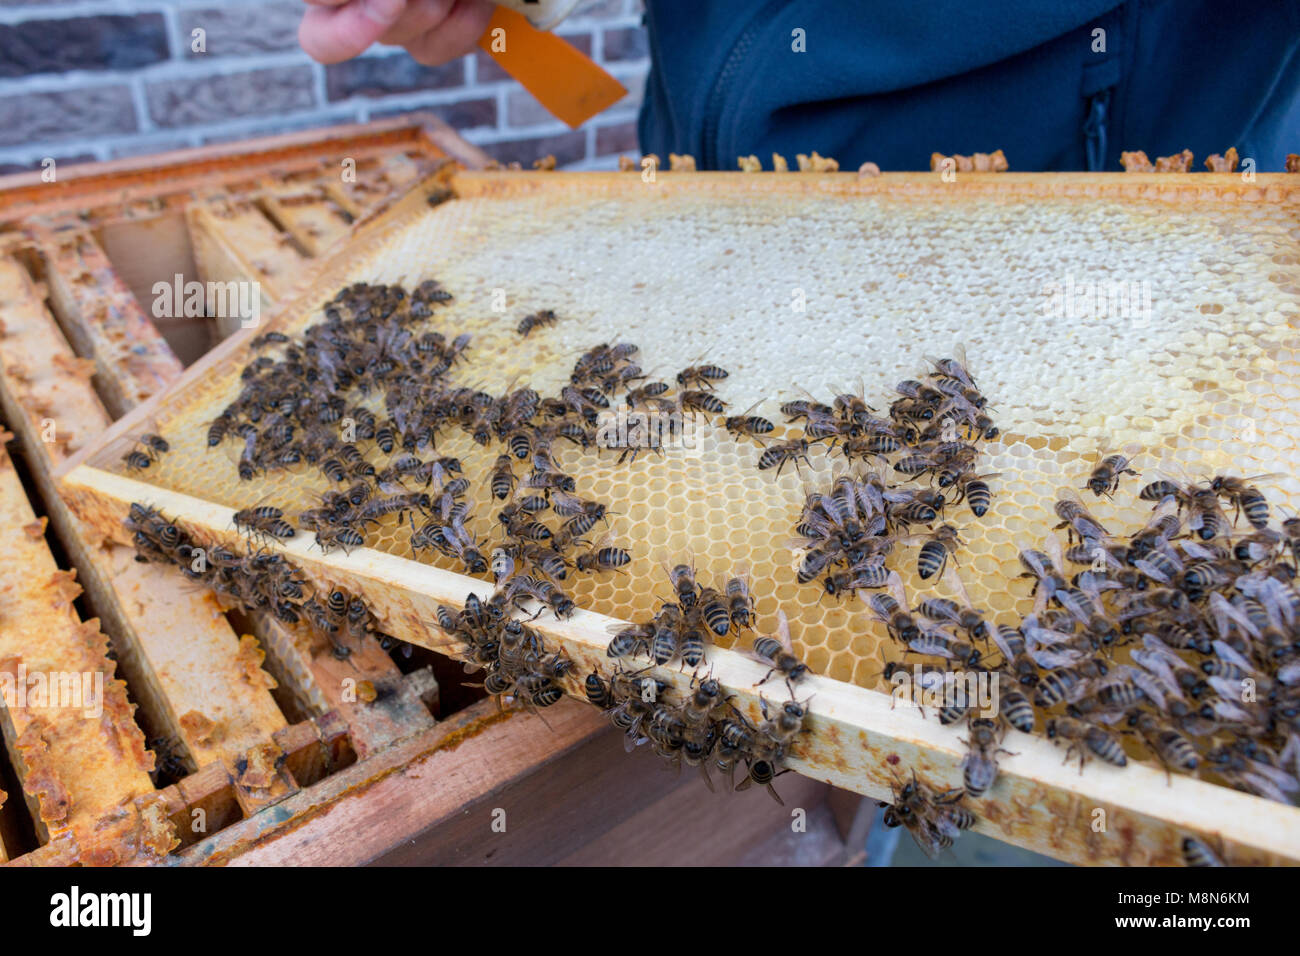 Beekeeper checks a frame of a beehive.  It shows open and closed cells of a honeycomb and bees crawling on it Stock Photo